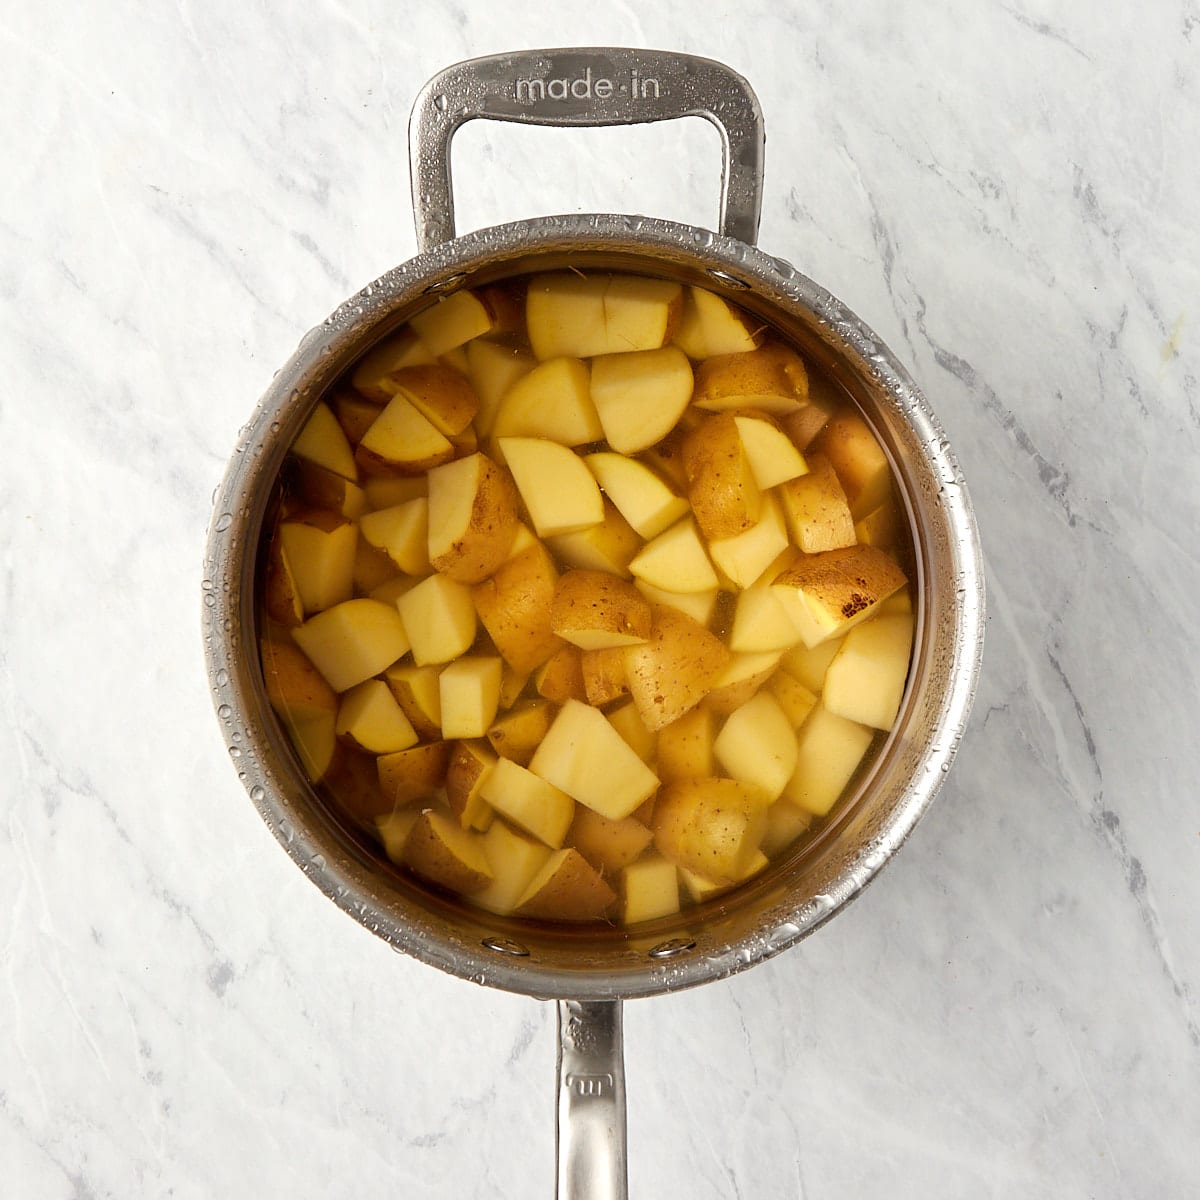 cut up Yukon gold potatoes in a saucepan with water.